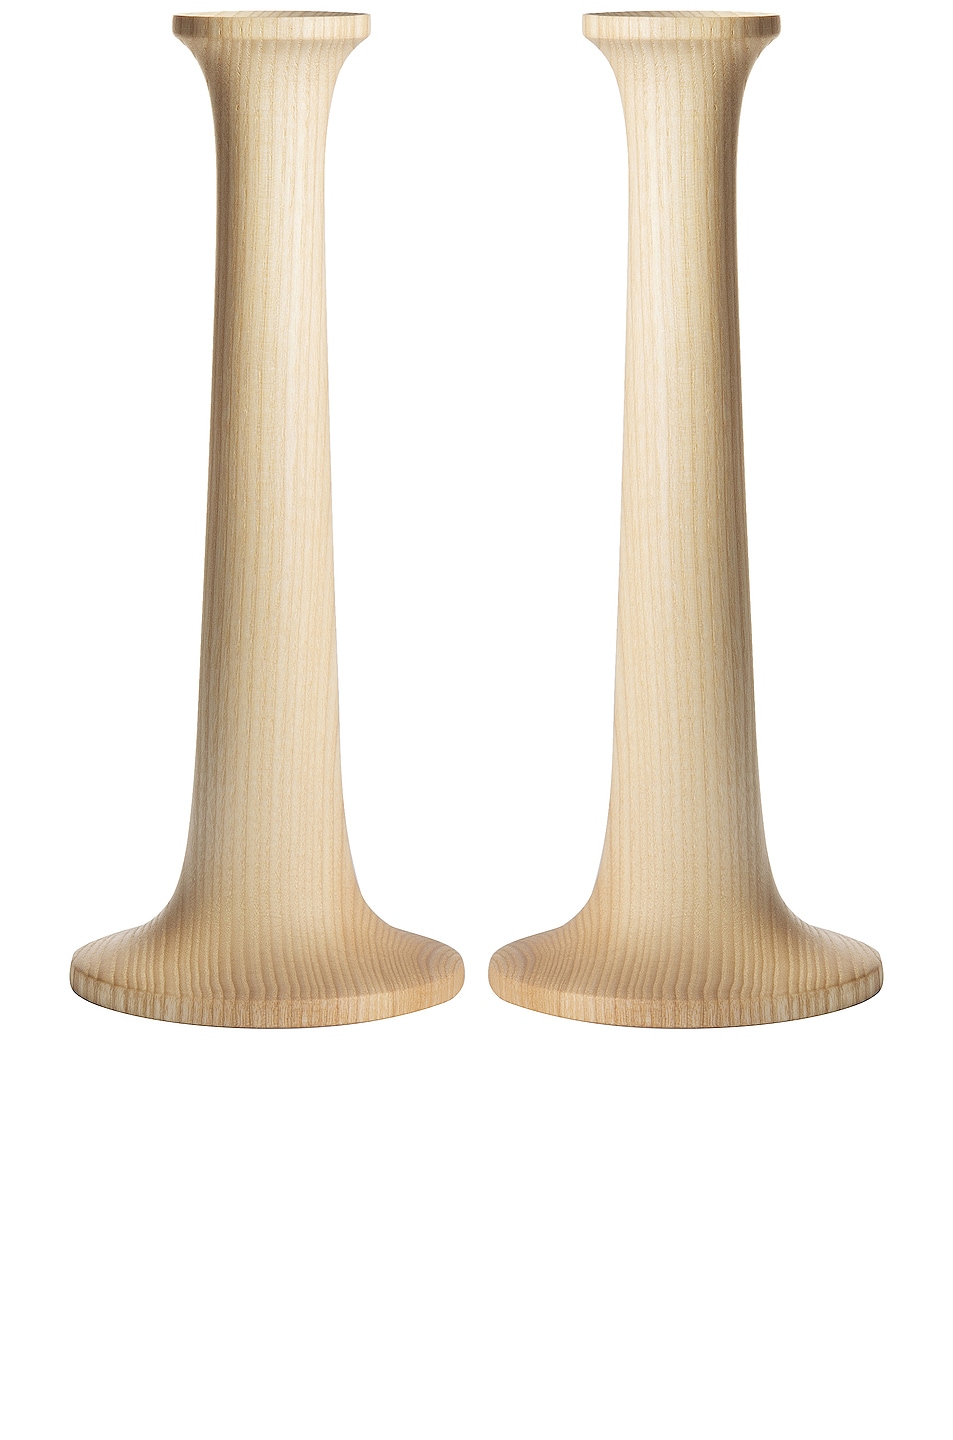 Image 1 of HAWKINS NEW YORK Set of 2 Large Simple Candle Holder in Maple